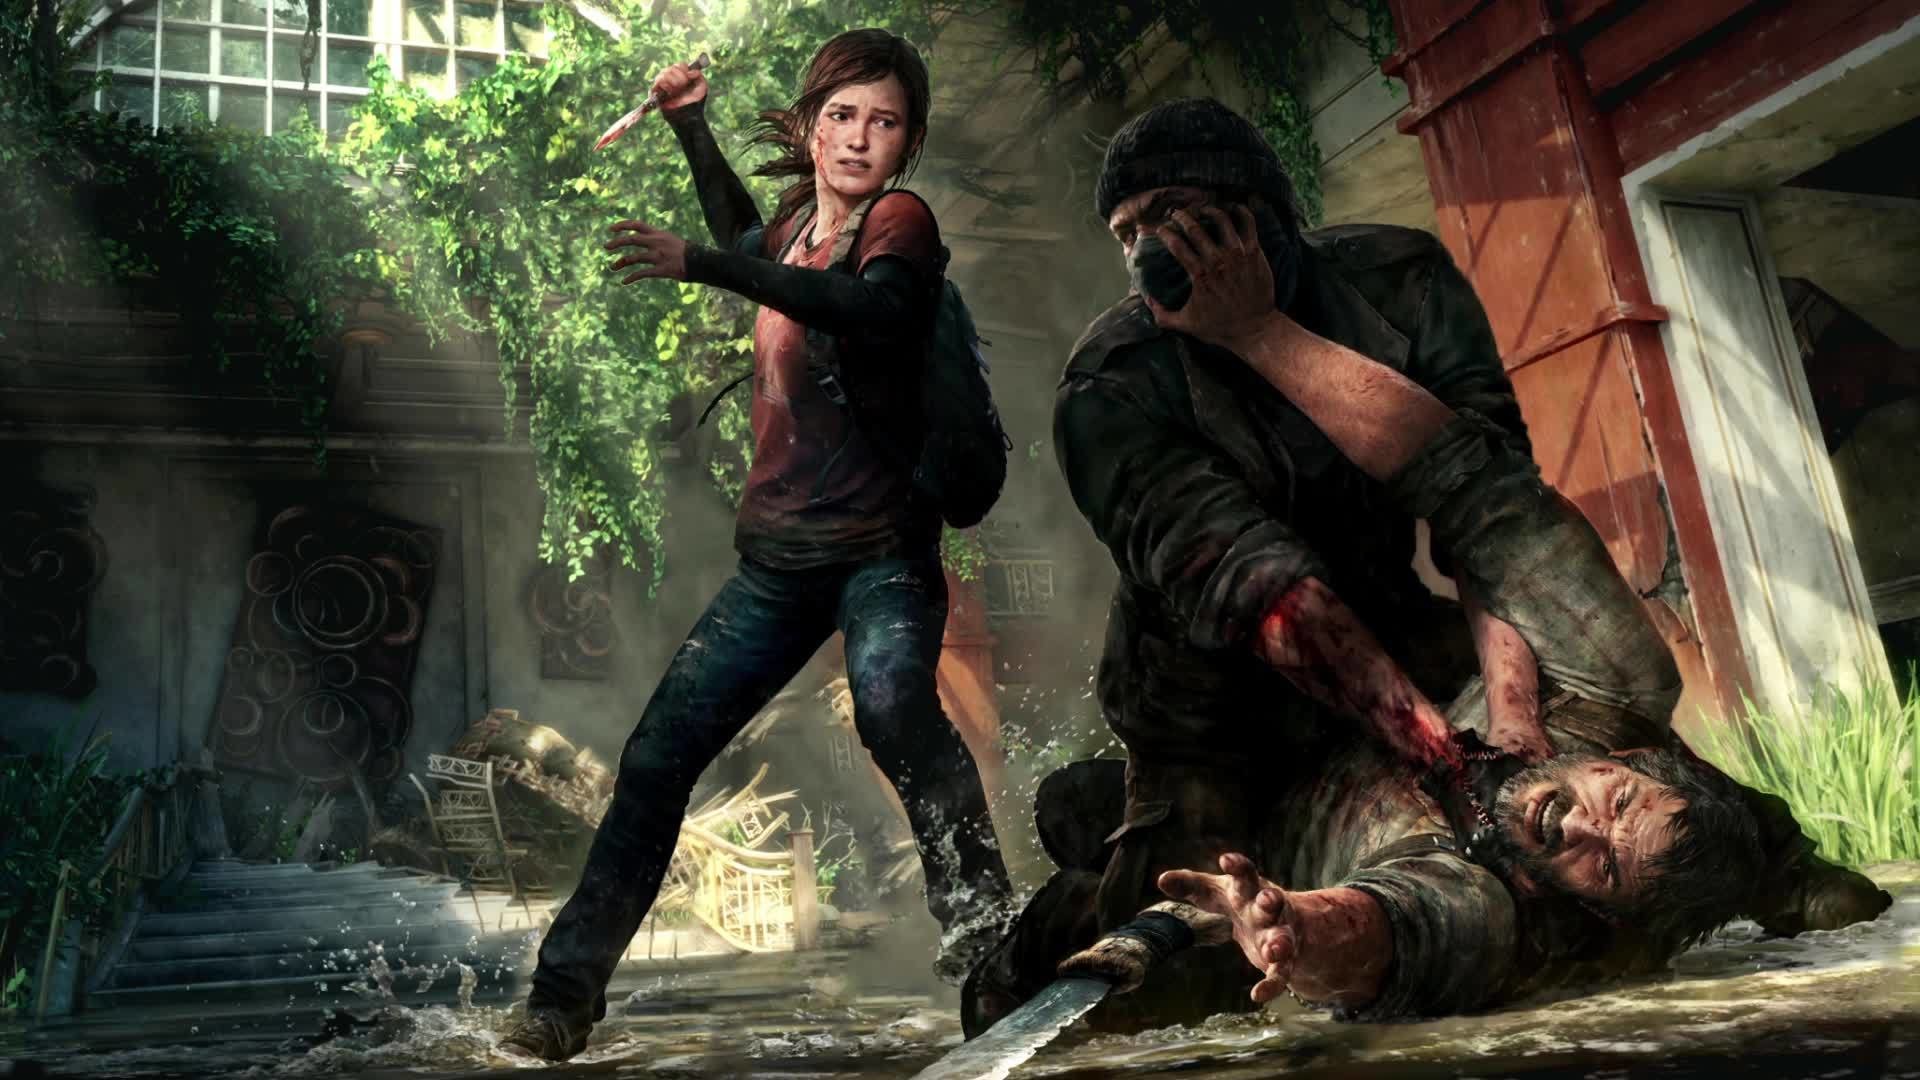 1920x1080 TLOU Animated Wallpaper - A College assignment I had. Hope you enjoy!